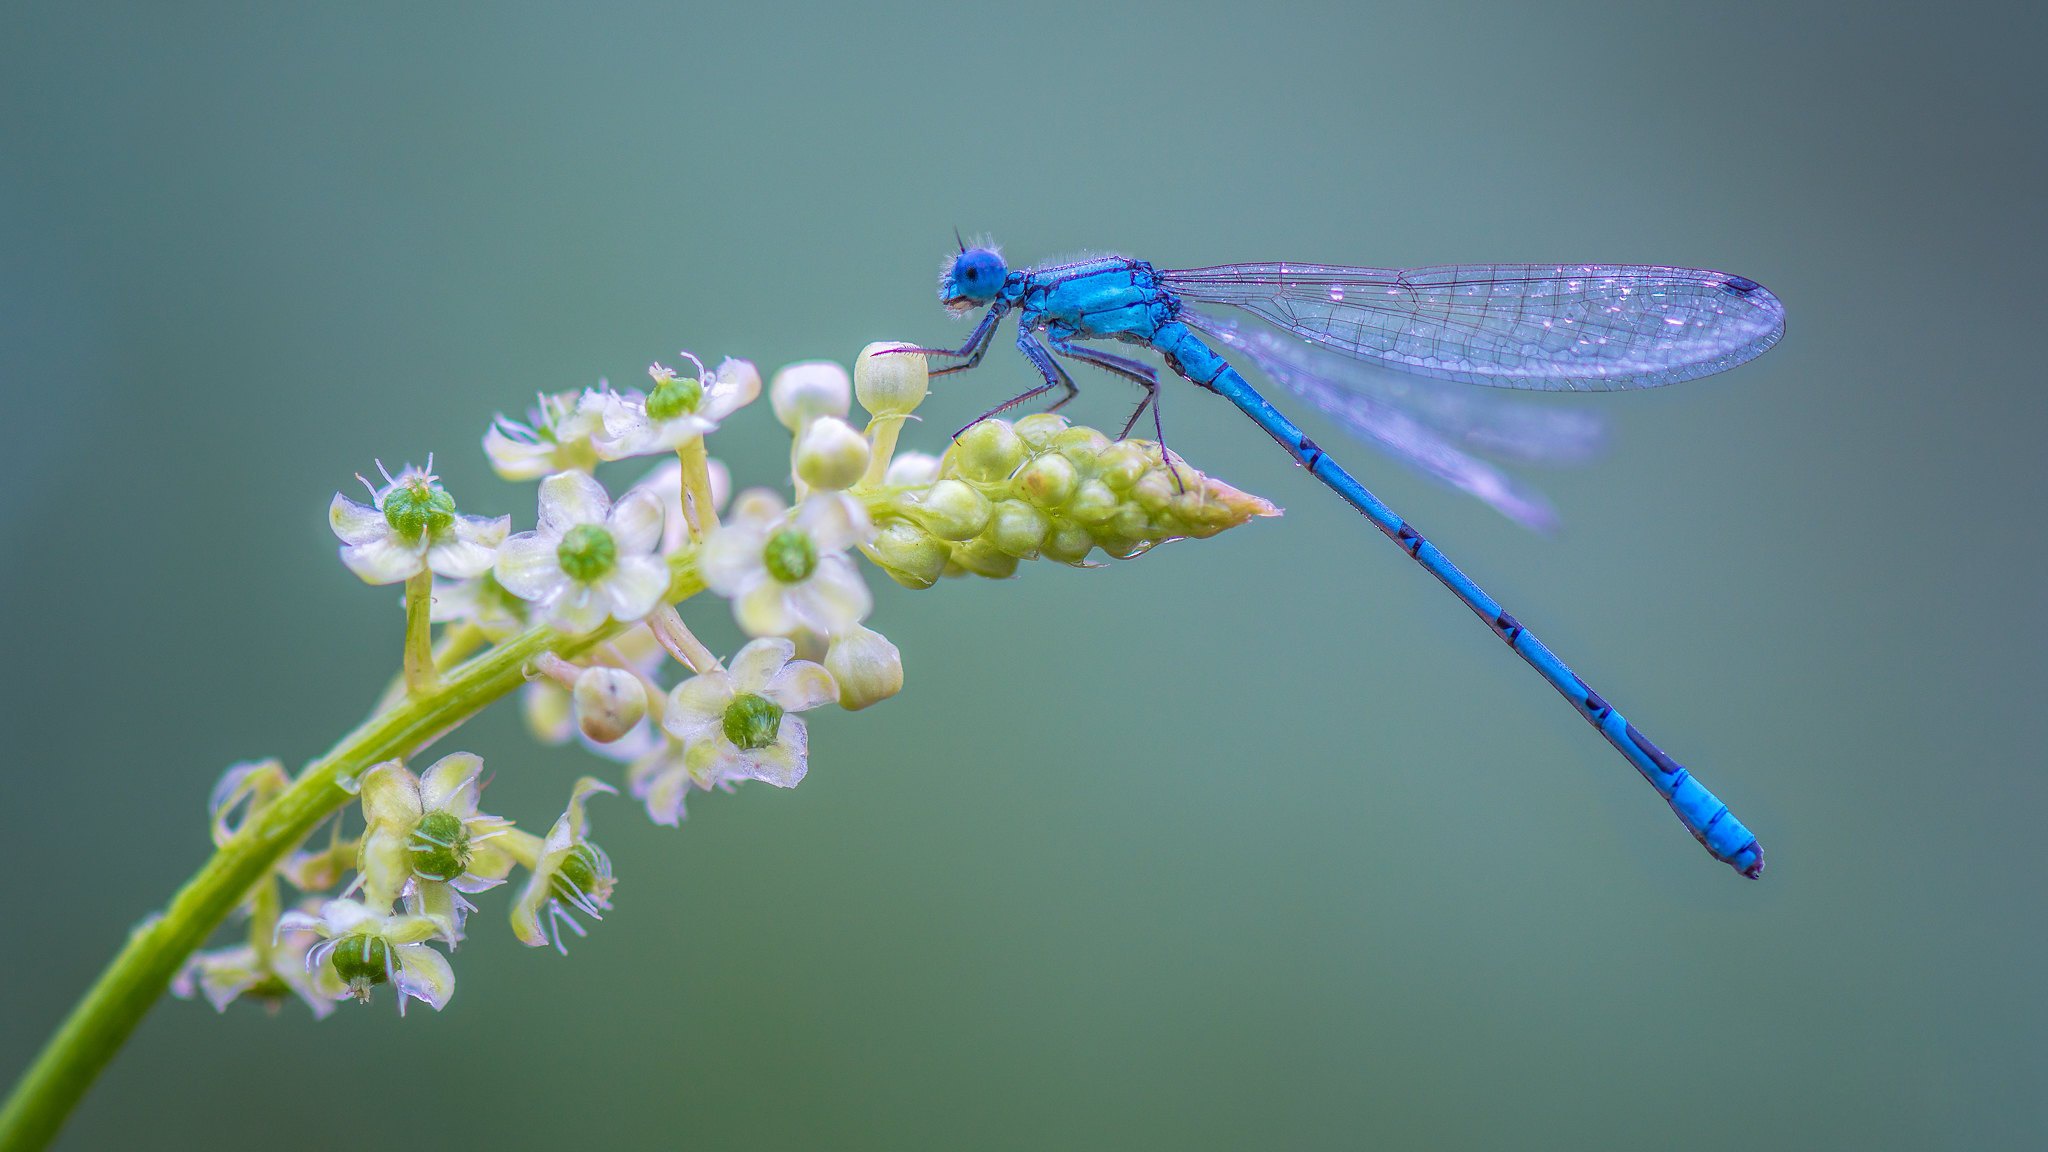 Dragonfly Flower Insect Macro 2048x1152